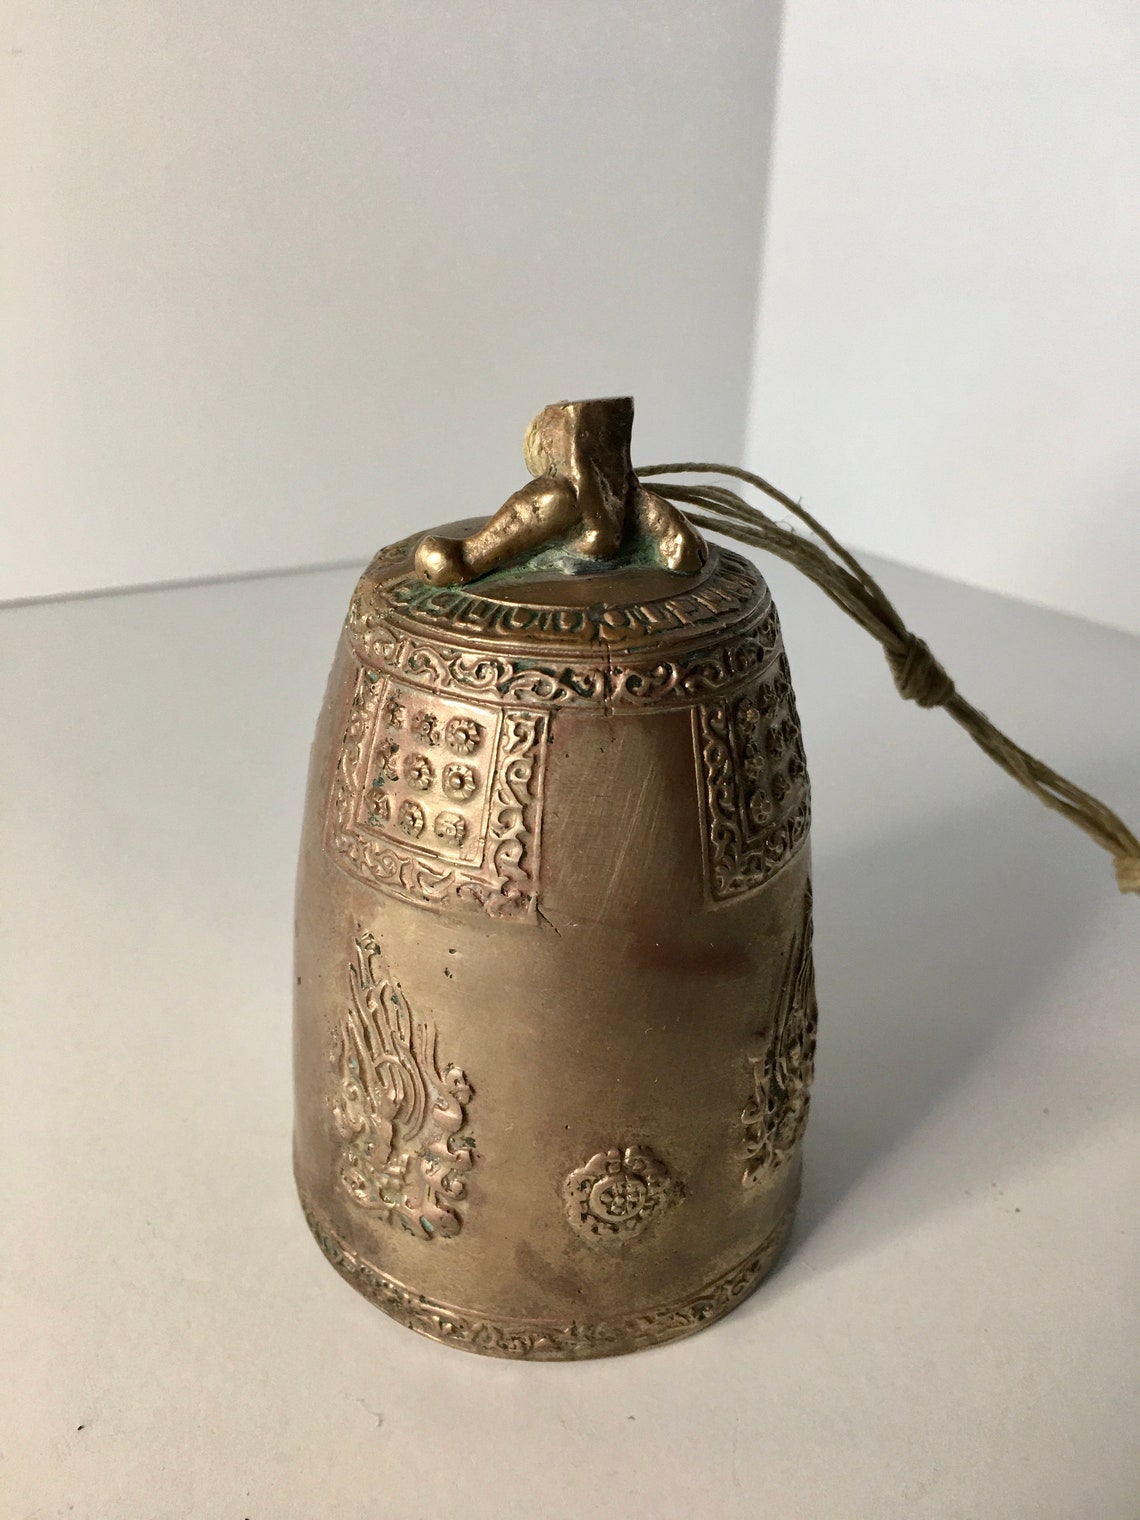 Vintage 1950s Chinese Solid Brass Prayer Bell | Etsy